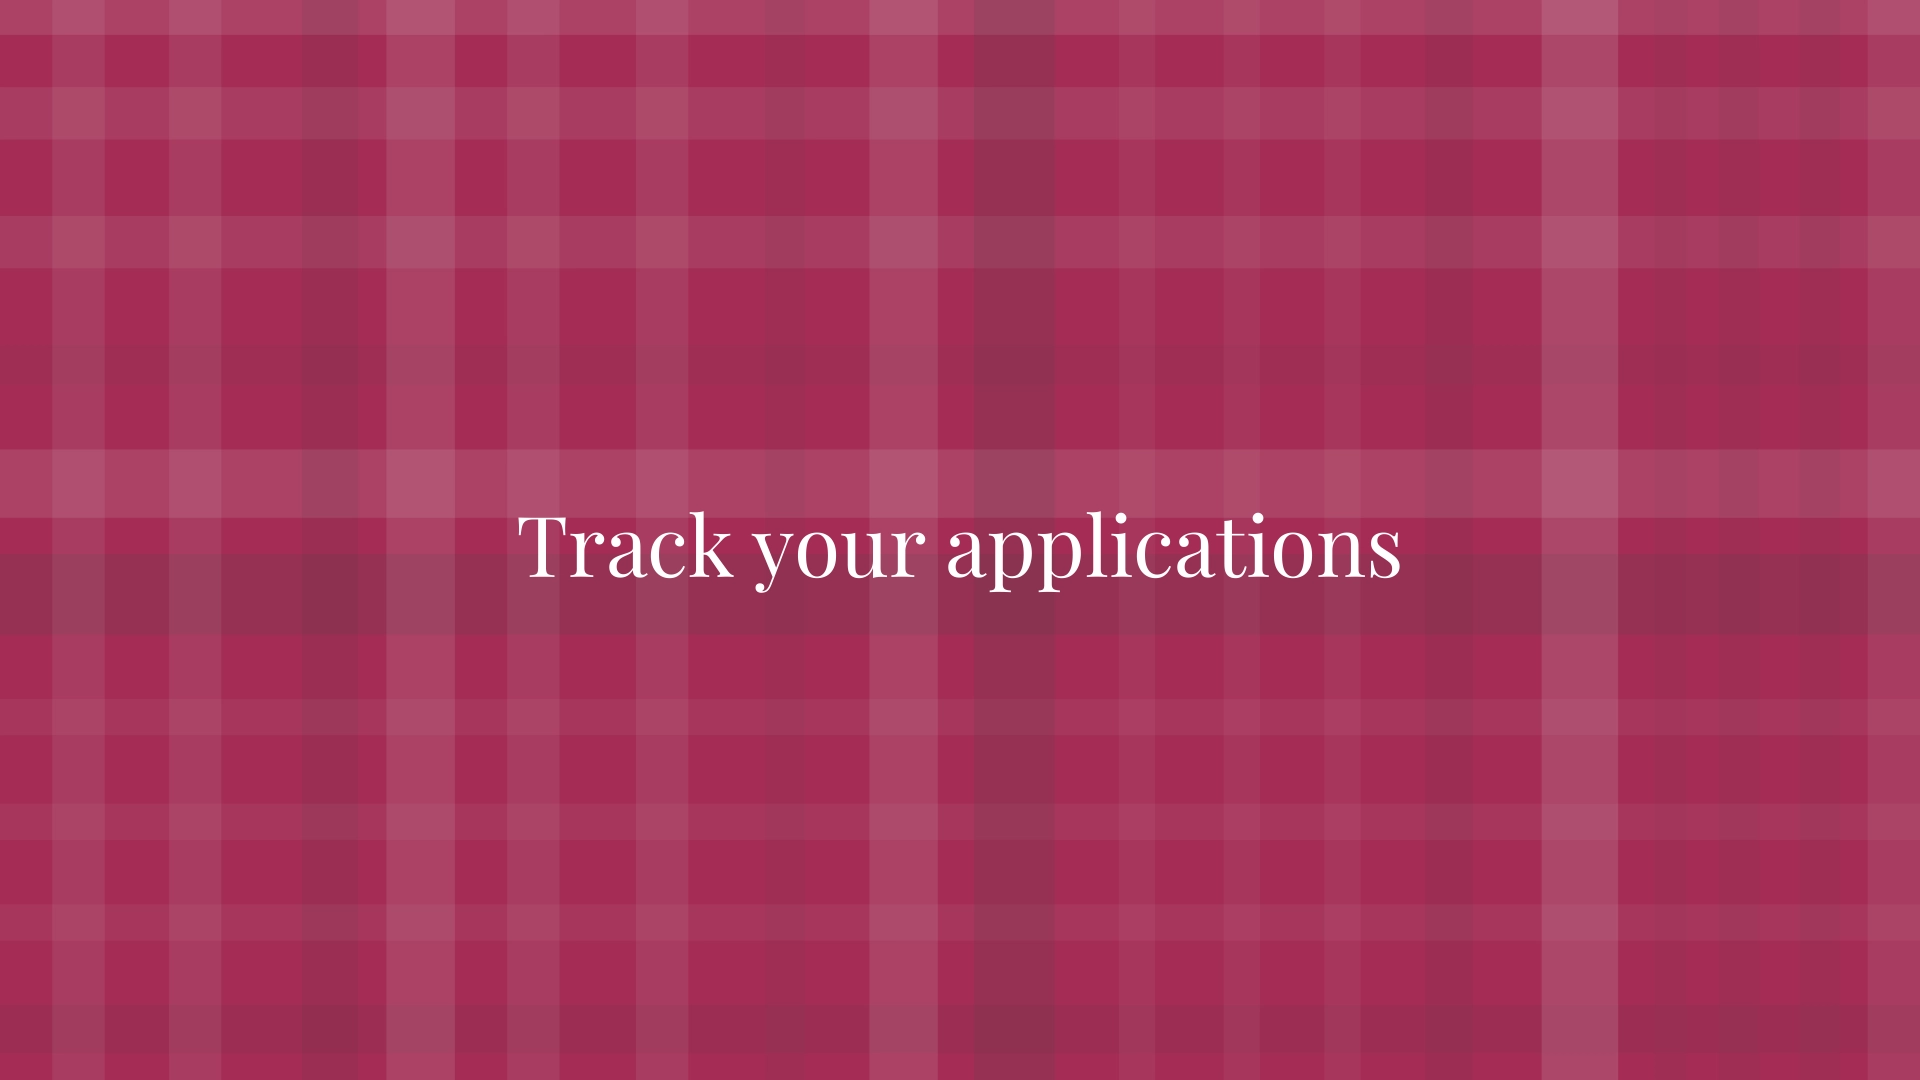 Track your applications